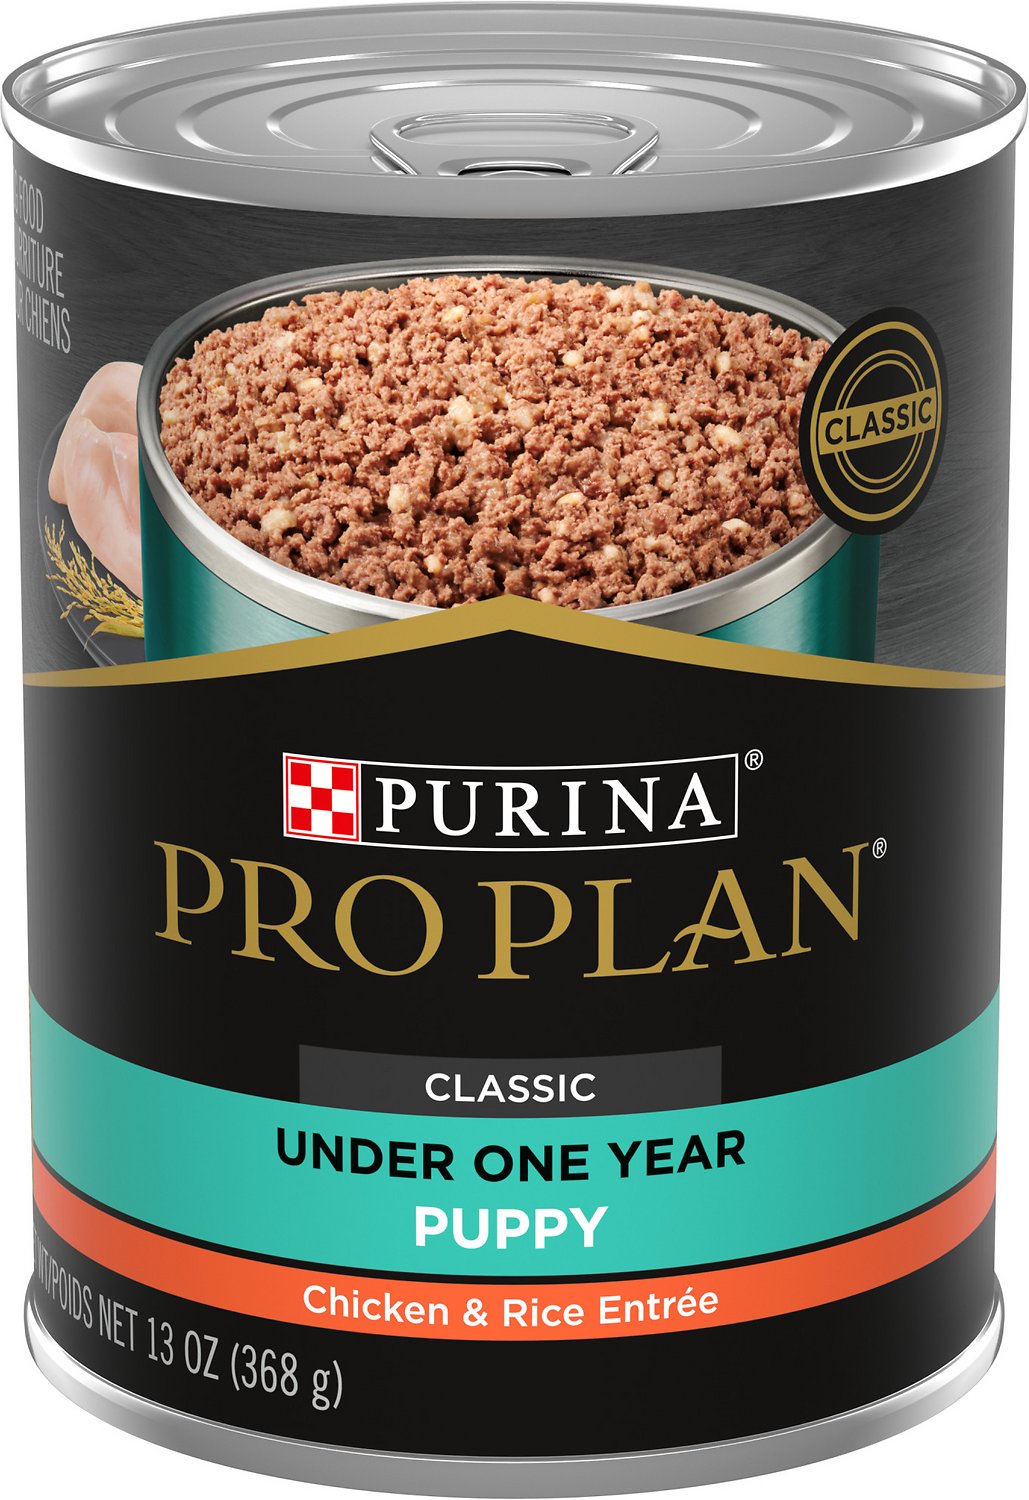 Purina Pro Plan Focus - All Breeds, Puppy Classic Chicken & Rice Entree Canned Dog Food-Southern Agriculture